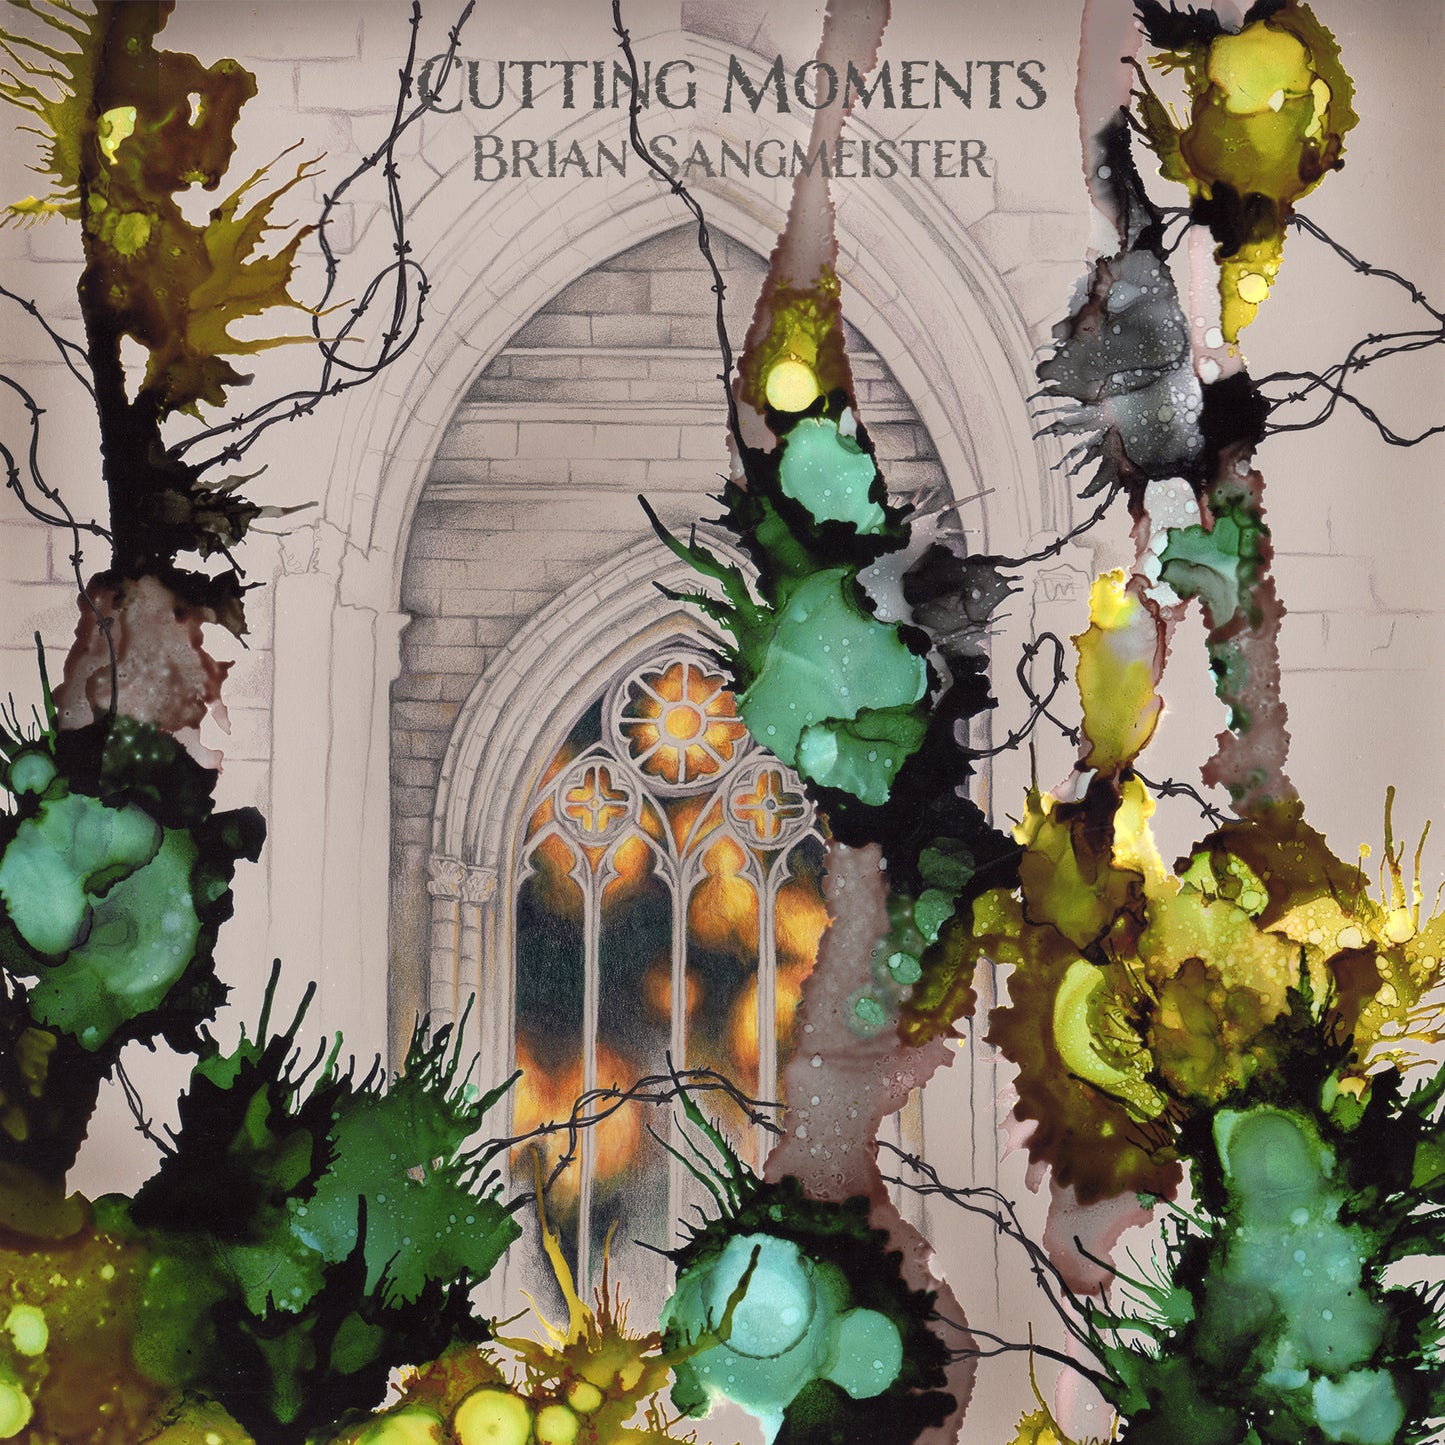 Cutting Moments / Brian Sangmeister